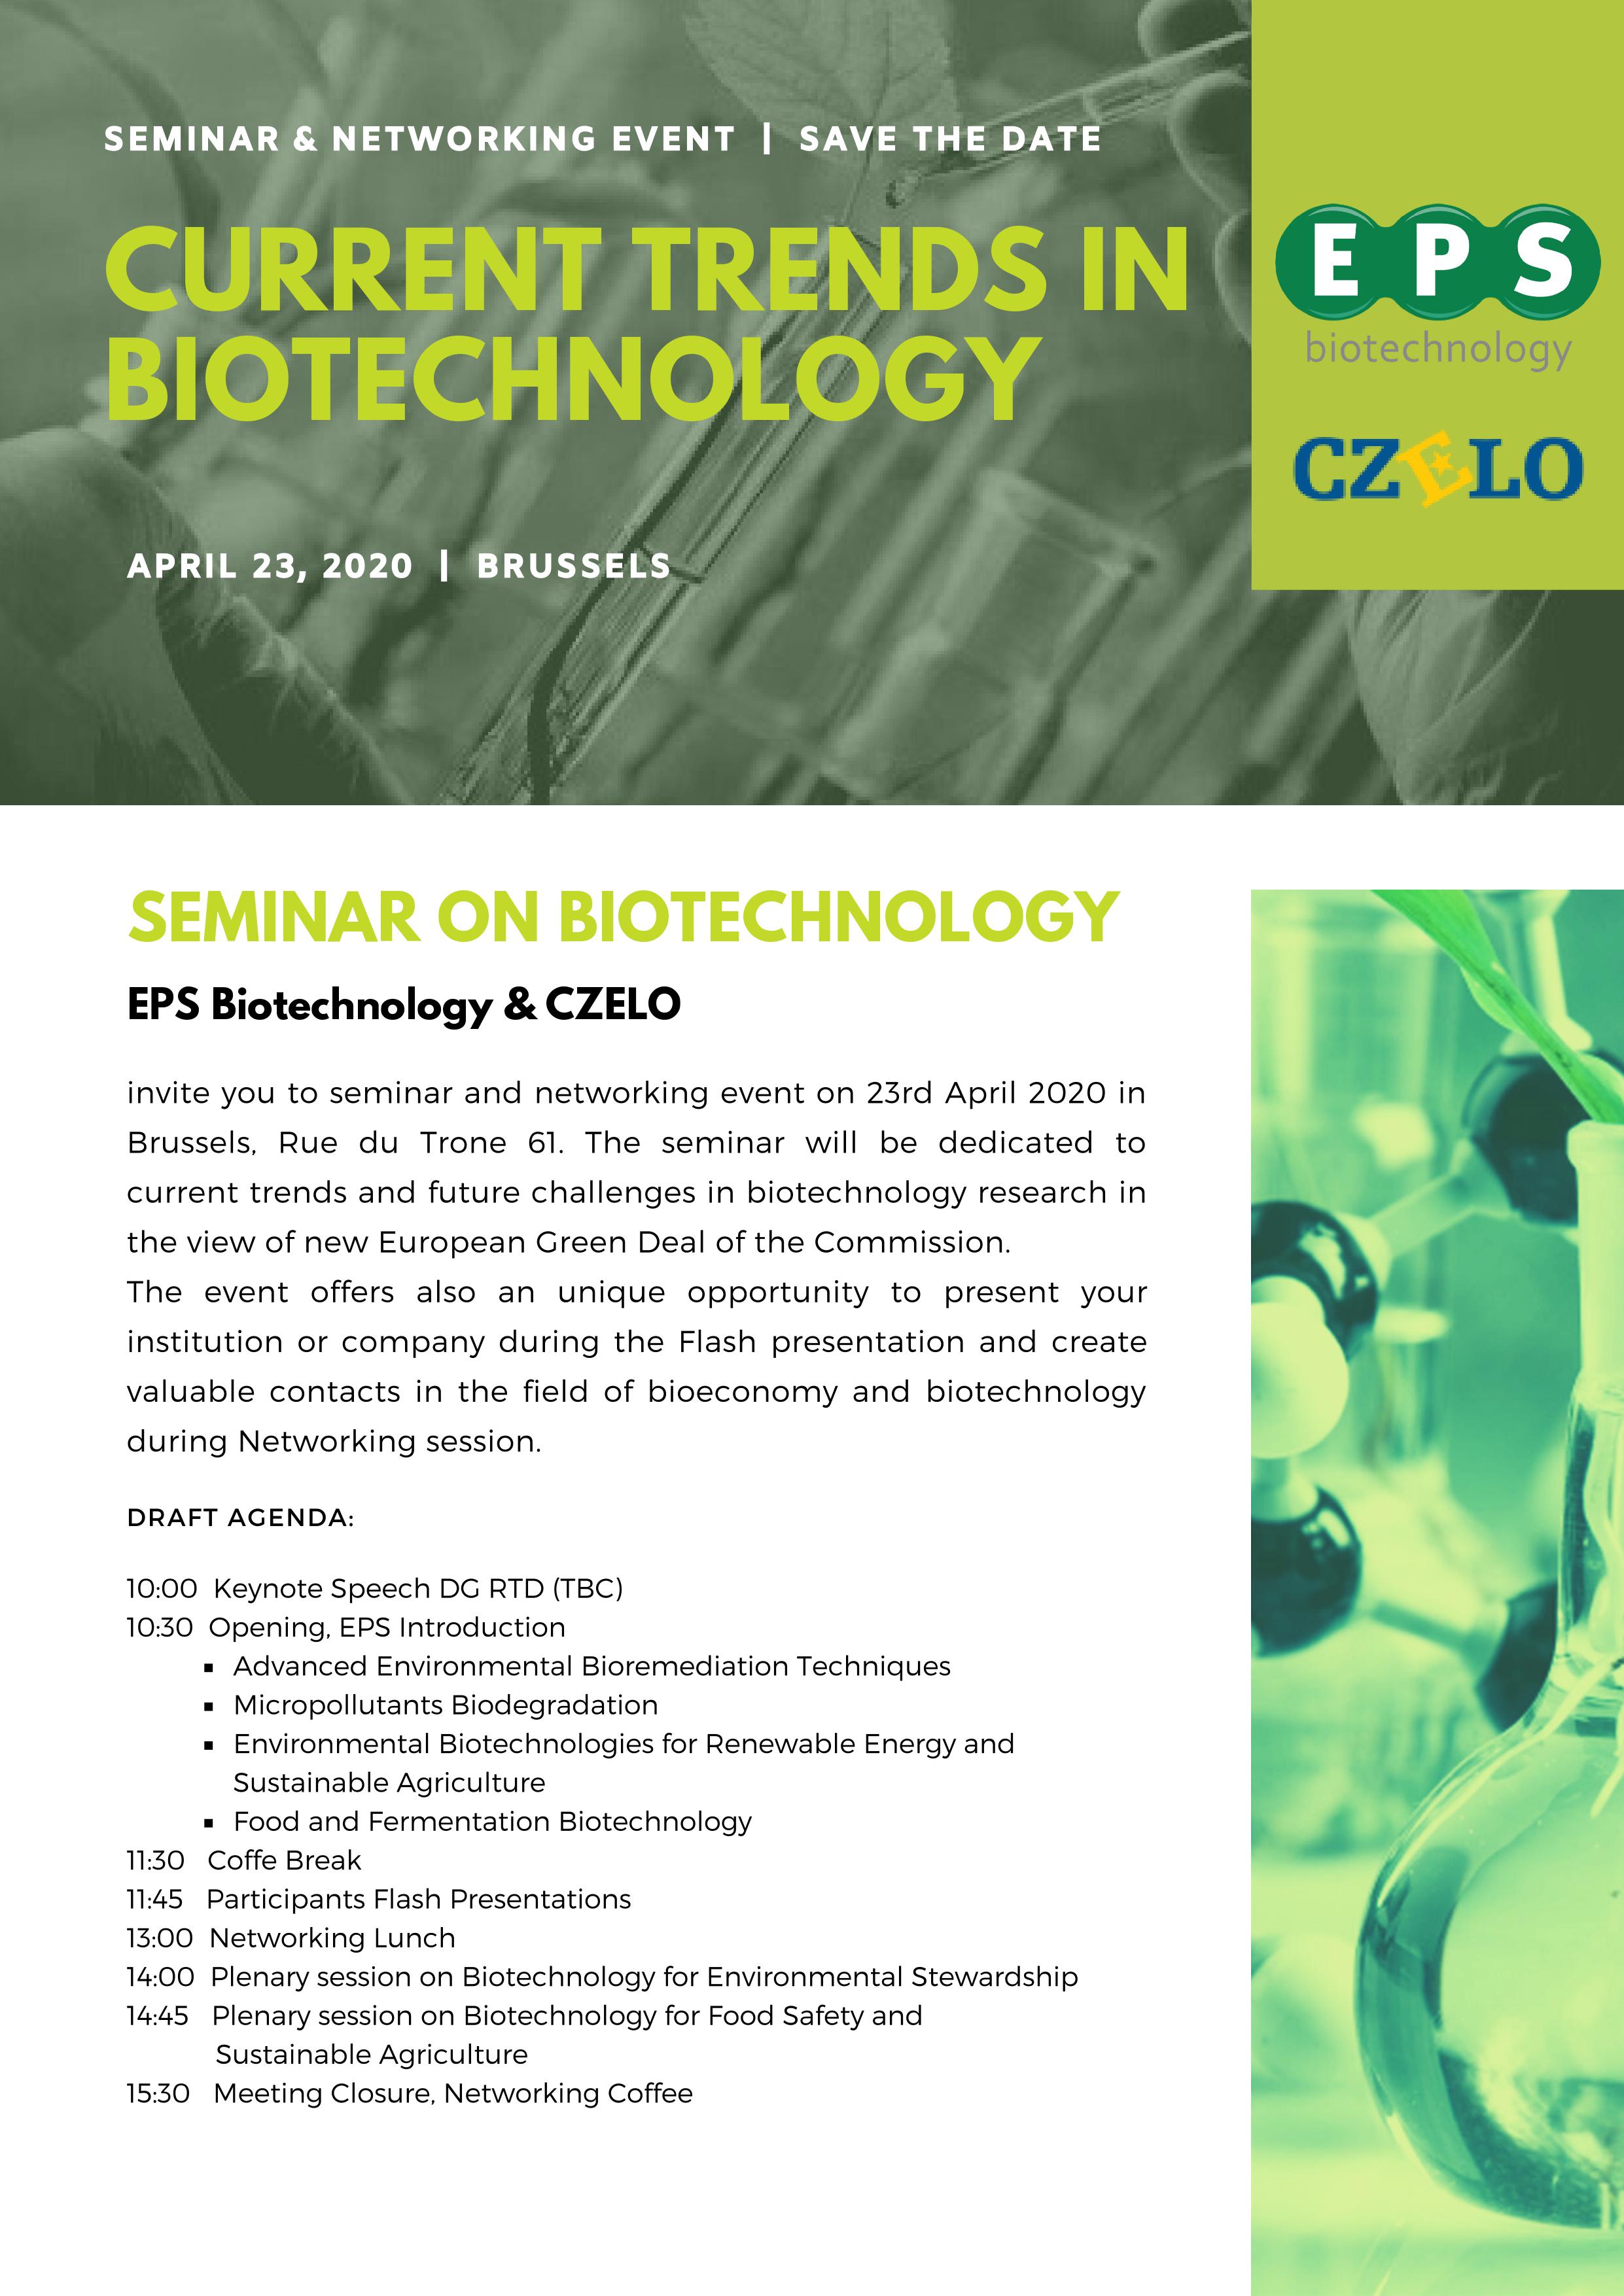 Seminar and networking event on current trends in biotechnology